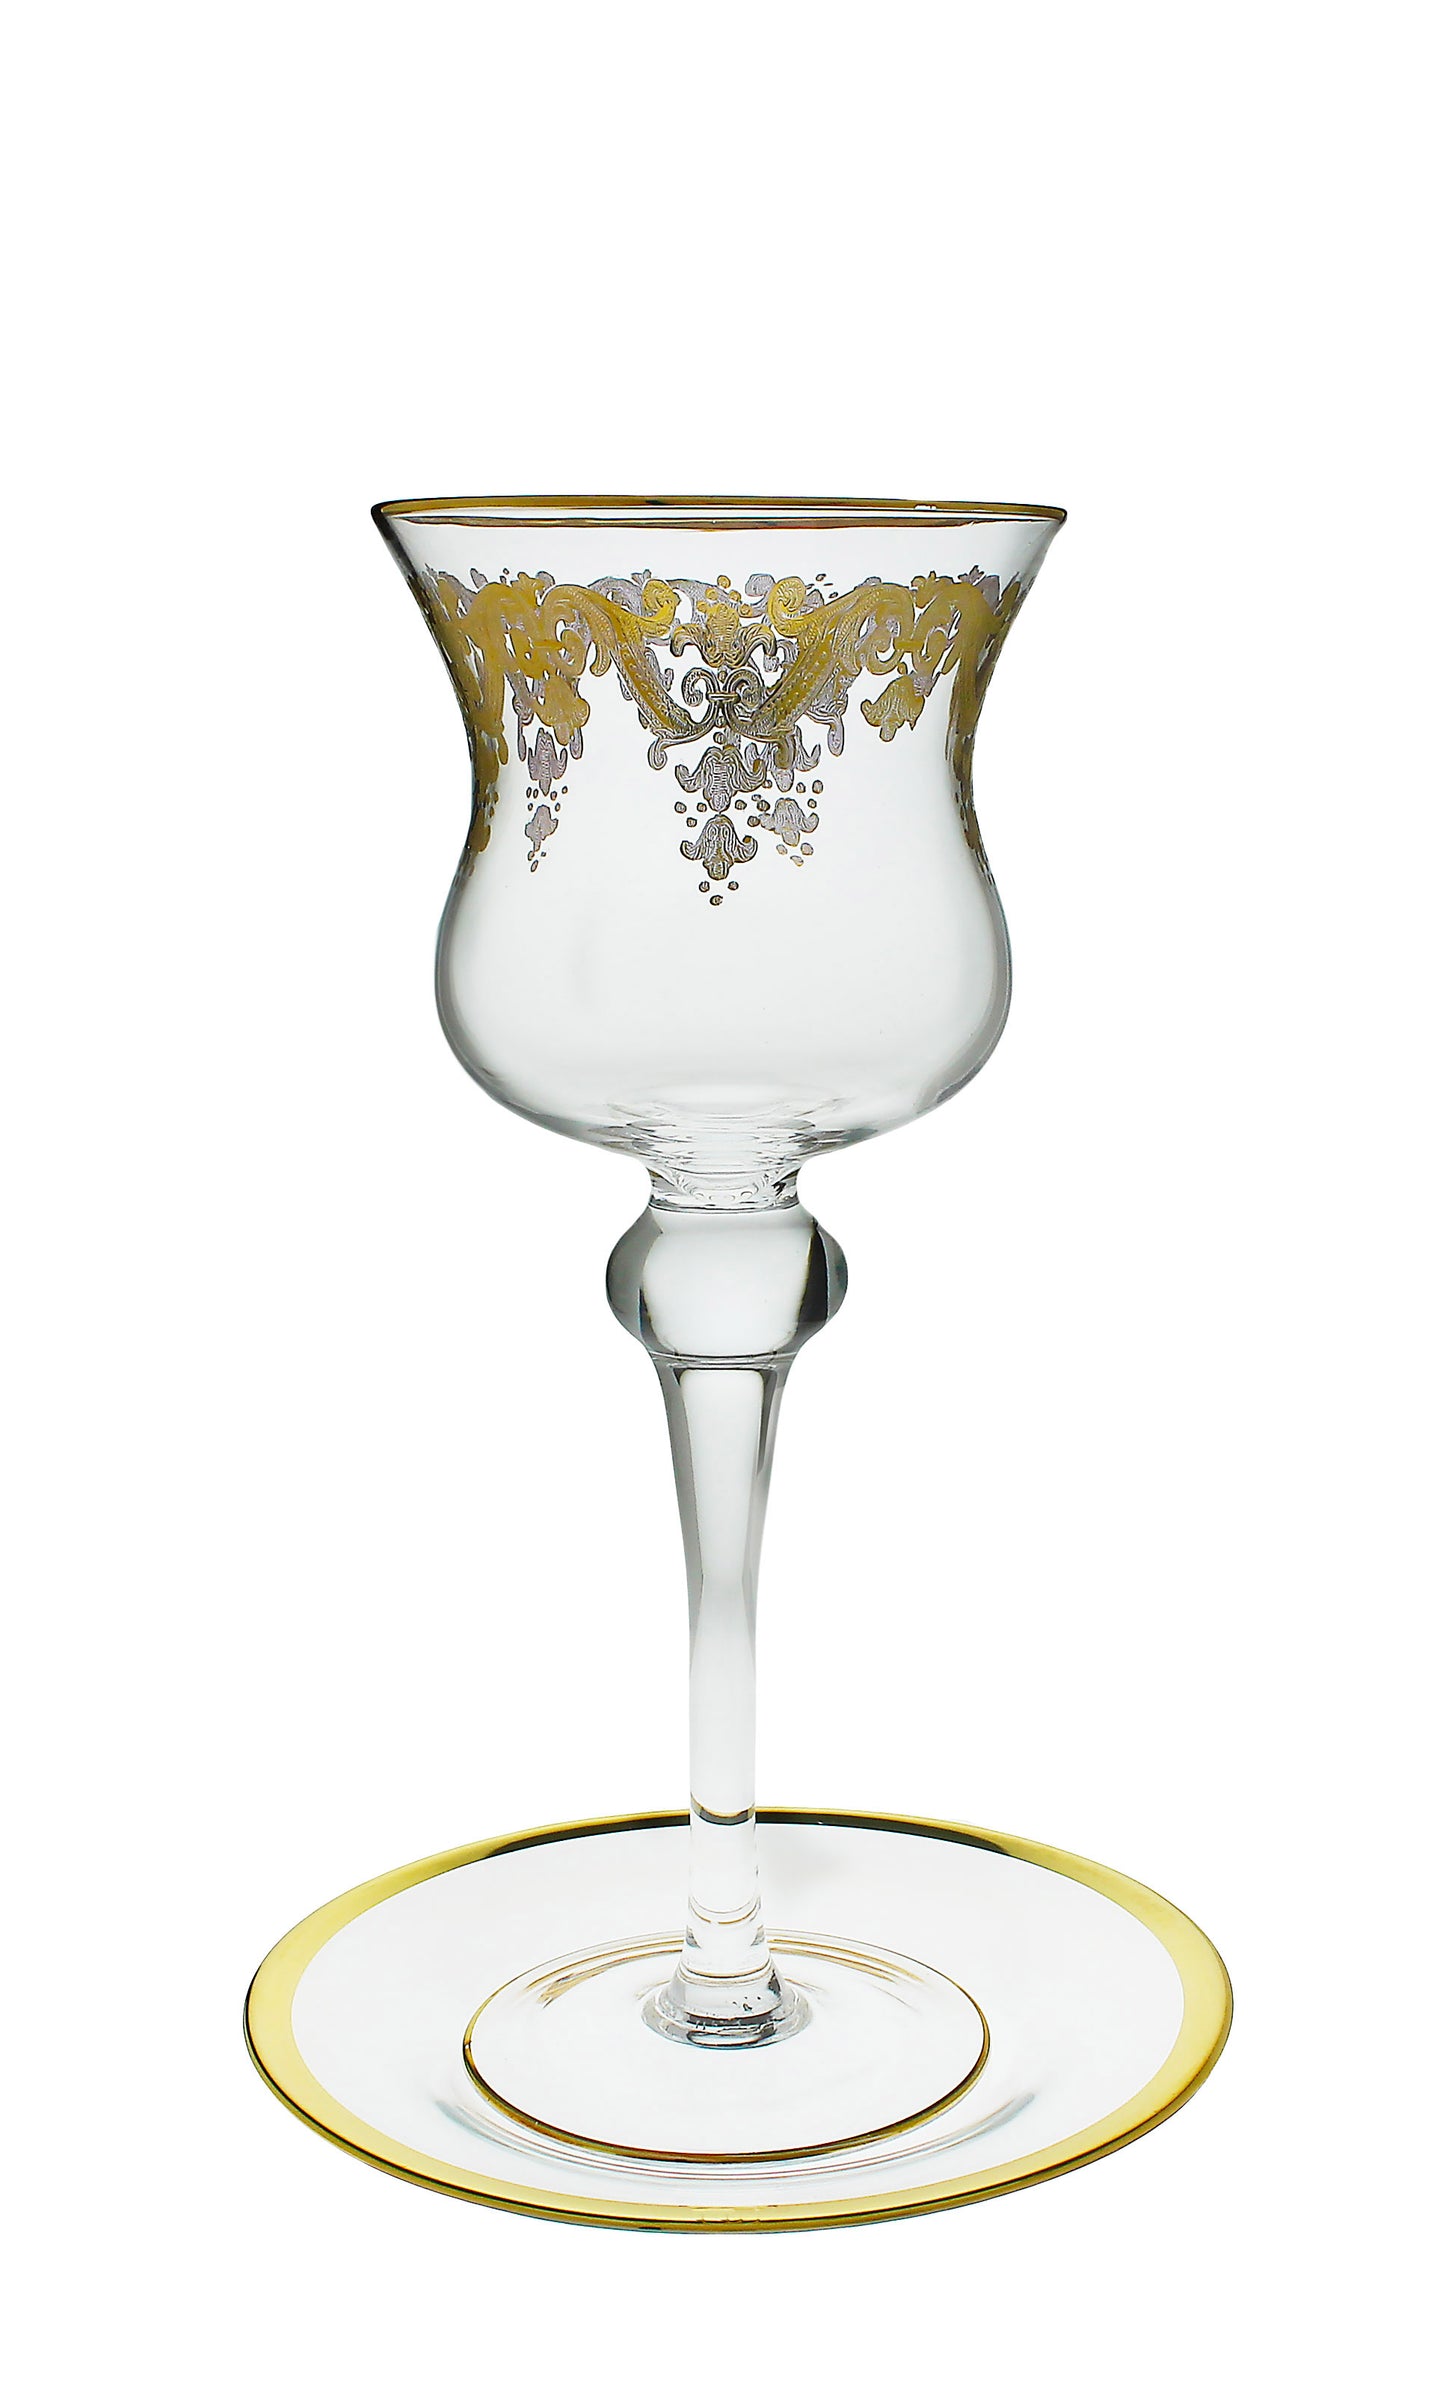 Glass Oversized Goblet on Tray with 24K Gold Artwork